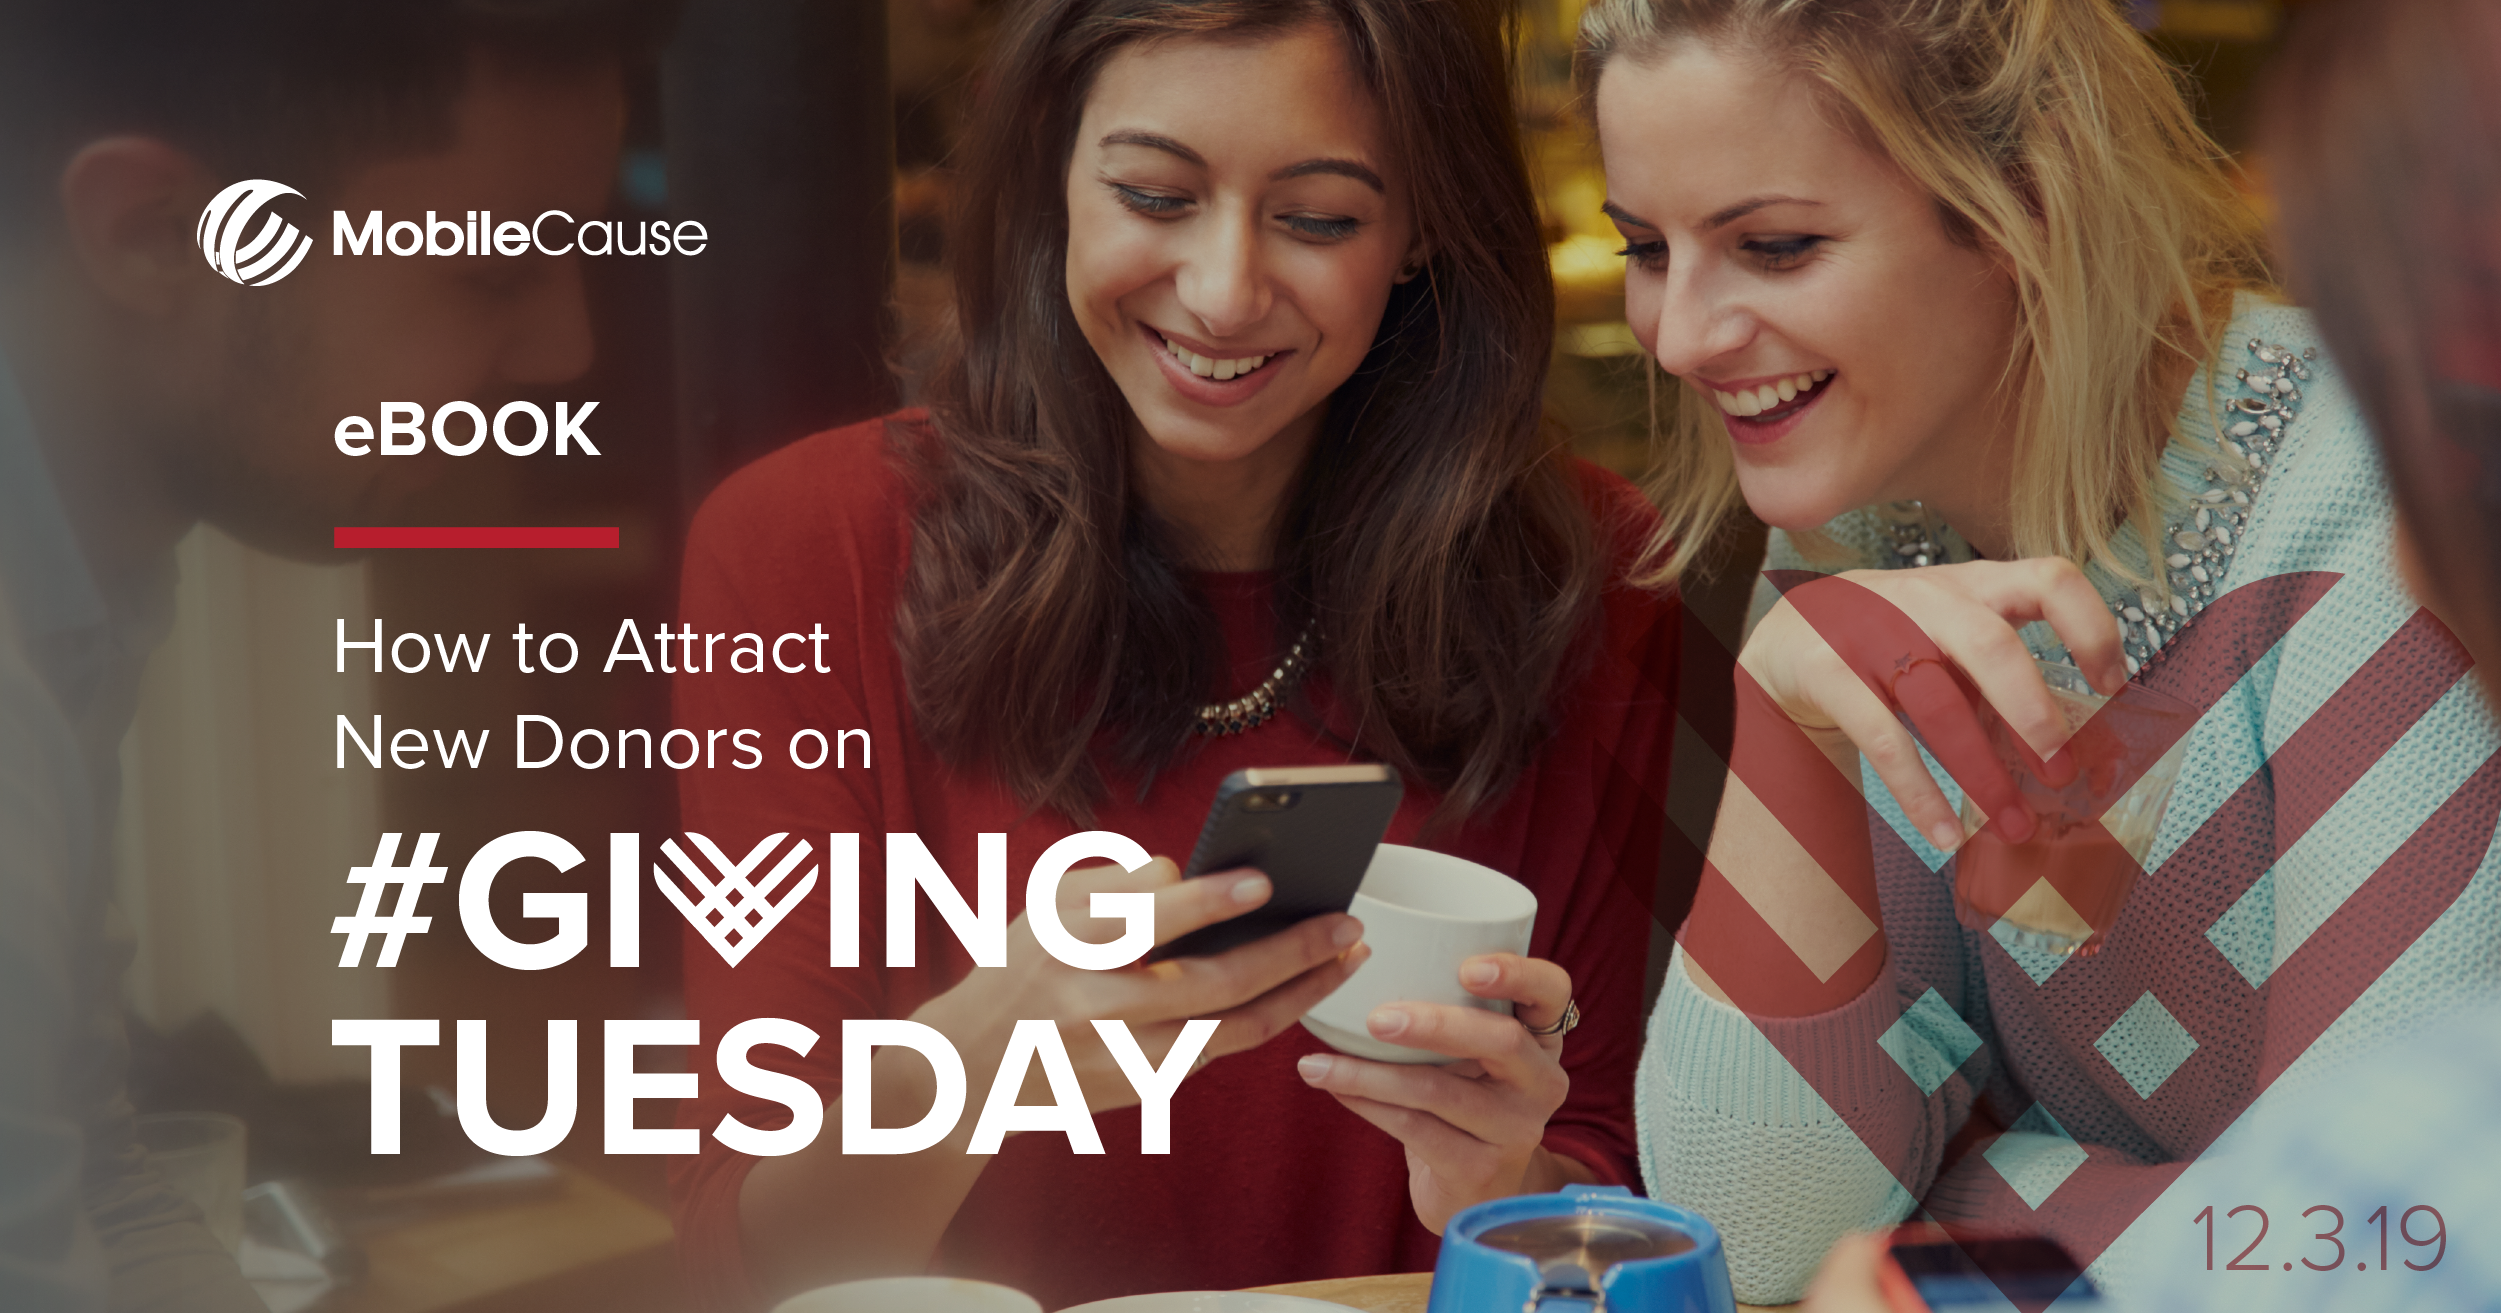 HowtoAttractNewDonorson_GivingTuesday_2019_eBook_Graphics_Email 1